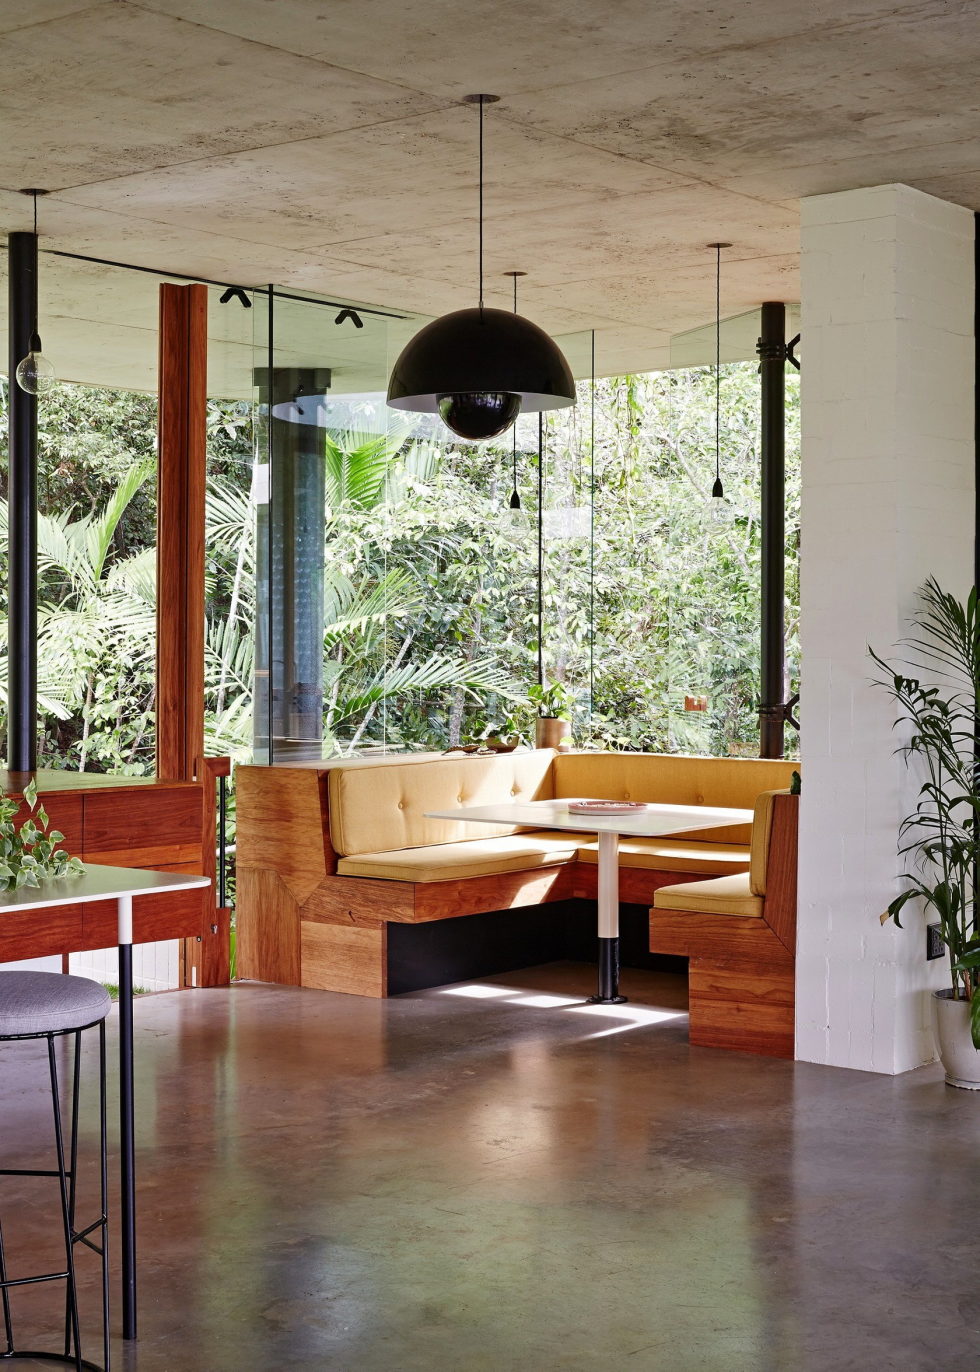 The glass house Planchonella in the tropical forest from Jesse Bennett Architect 8